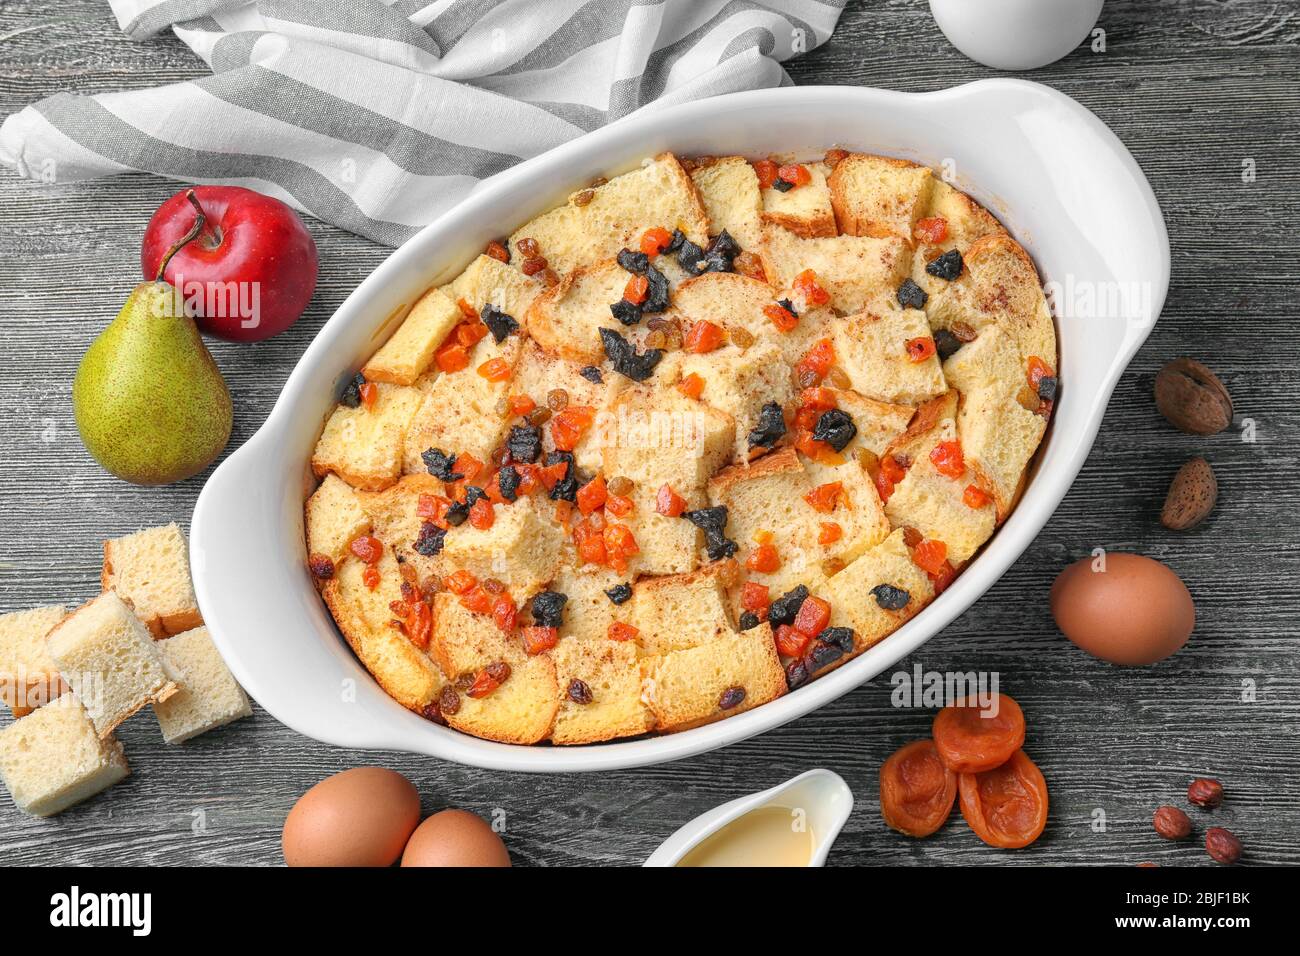 Freshly baked bread pudding in casserole dish and ingredients on wooden table Stock Photo